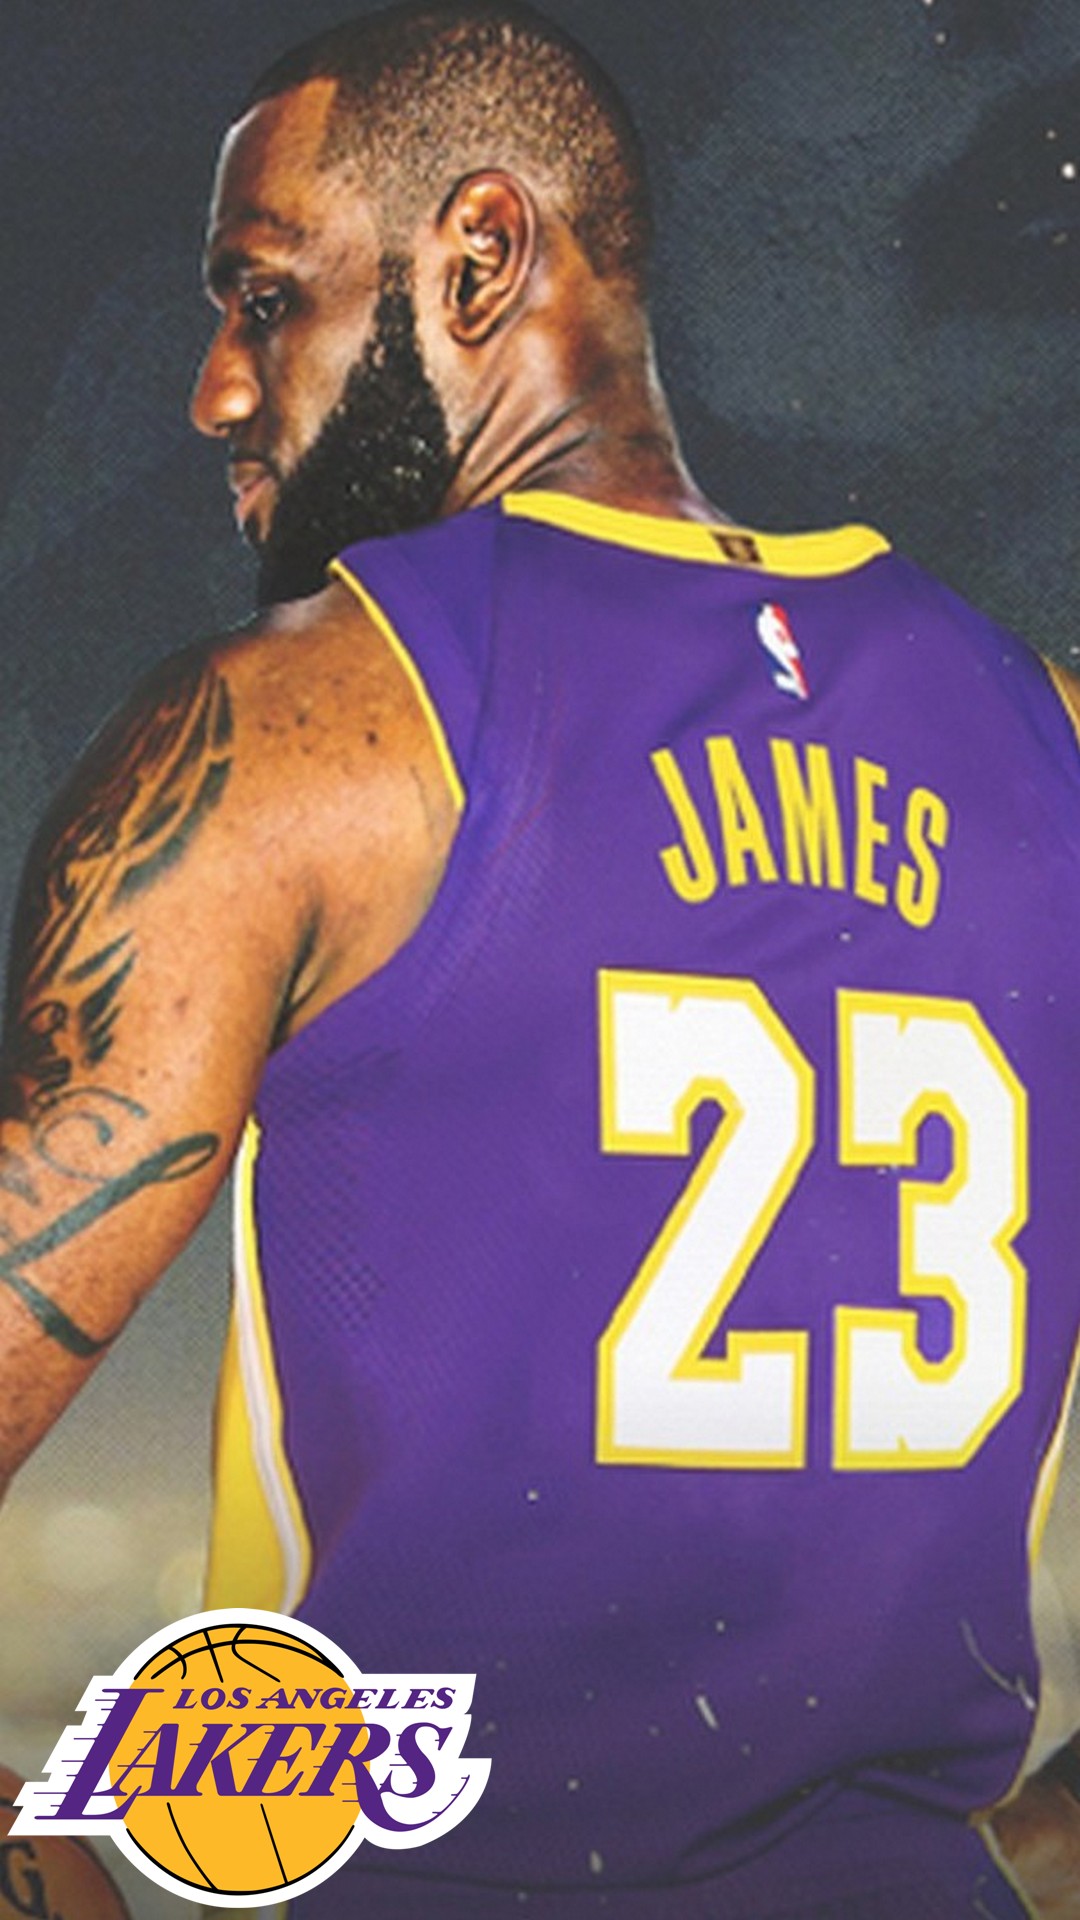 Wallpaper LeBron James Lakers iPhone with image dimensions 1080x1920 pixel. You can make this wallpaper for your Desktop Computer Backgrounds, Windows or Mac Screensavers, iPhone Lock screen, Tablet or Android and another Mobile Phone device